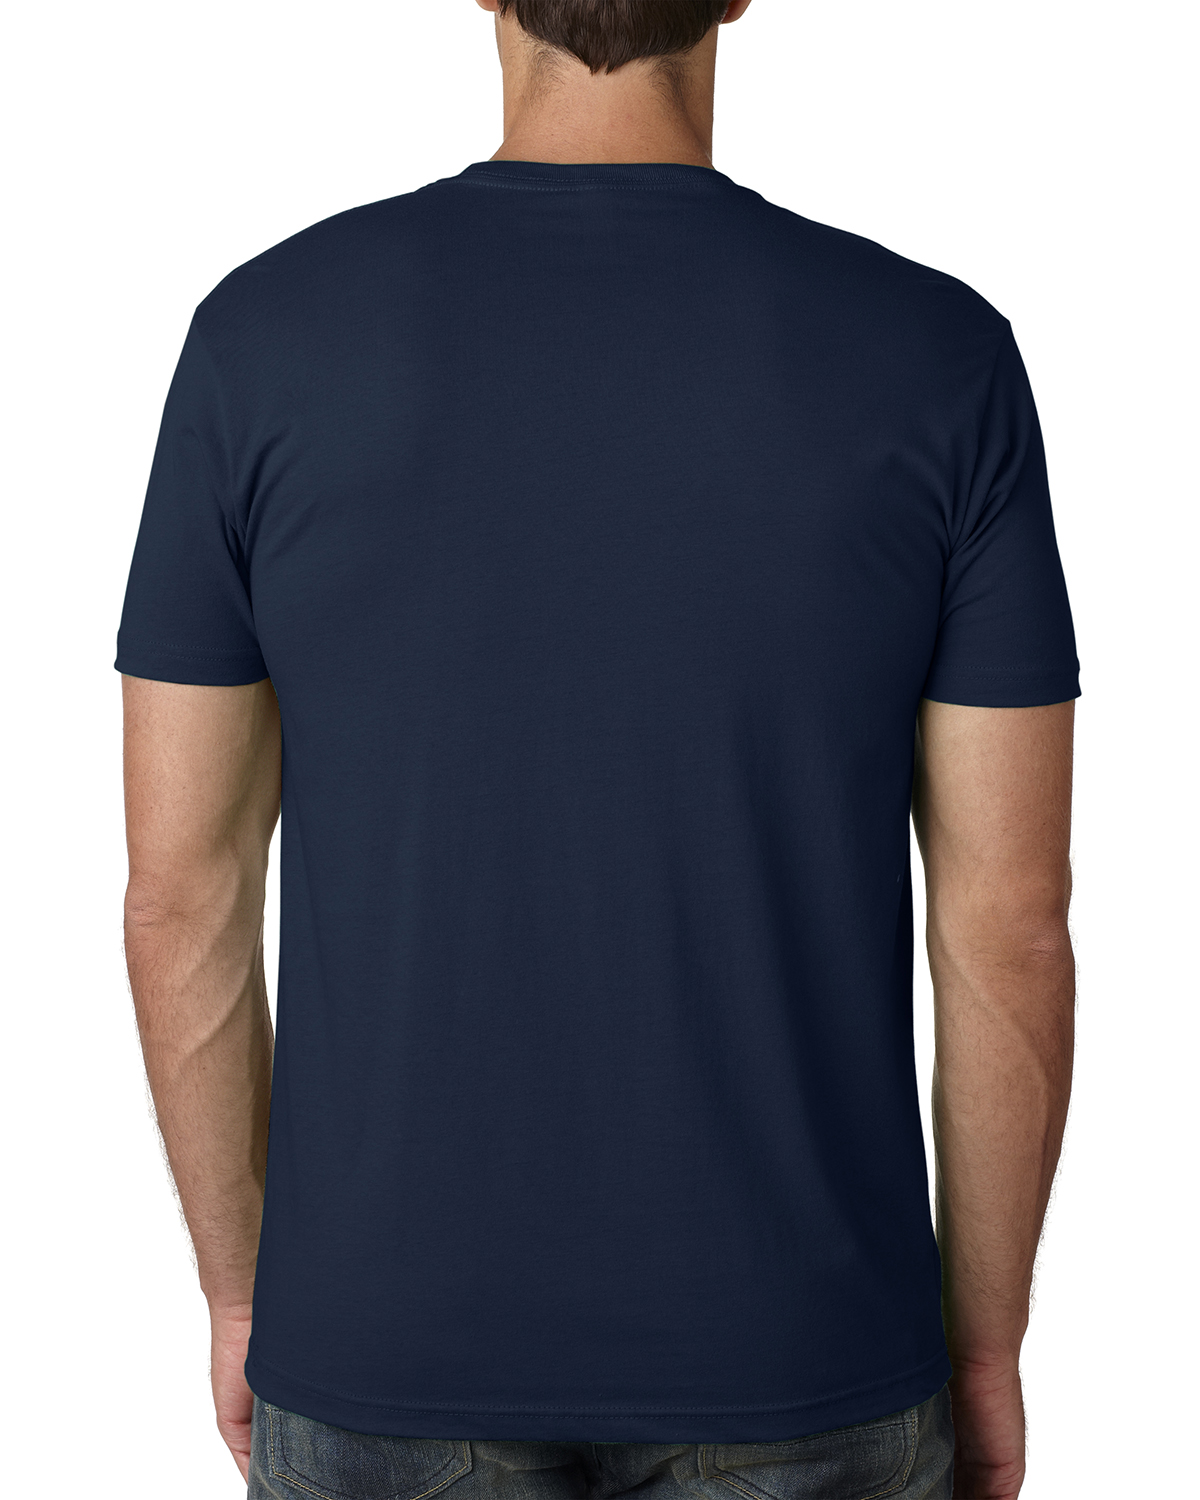 Details about   New Lowrance Dry Fit T-shirt Look!! 3X